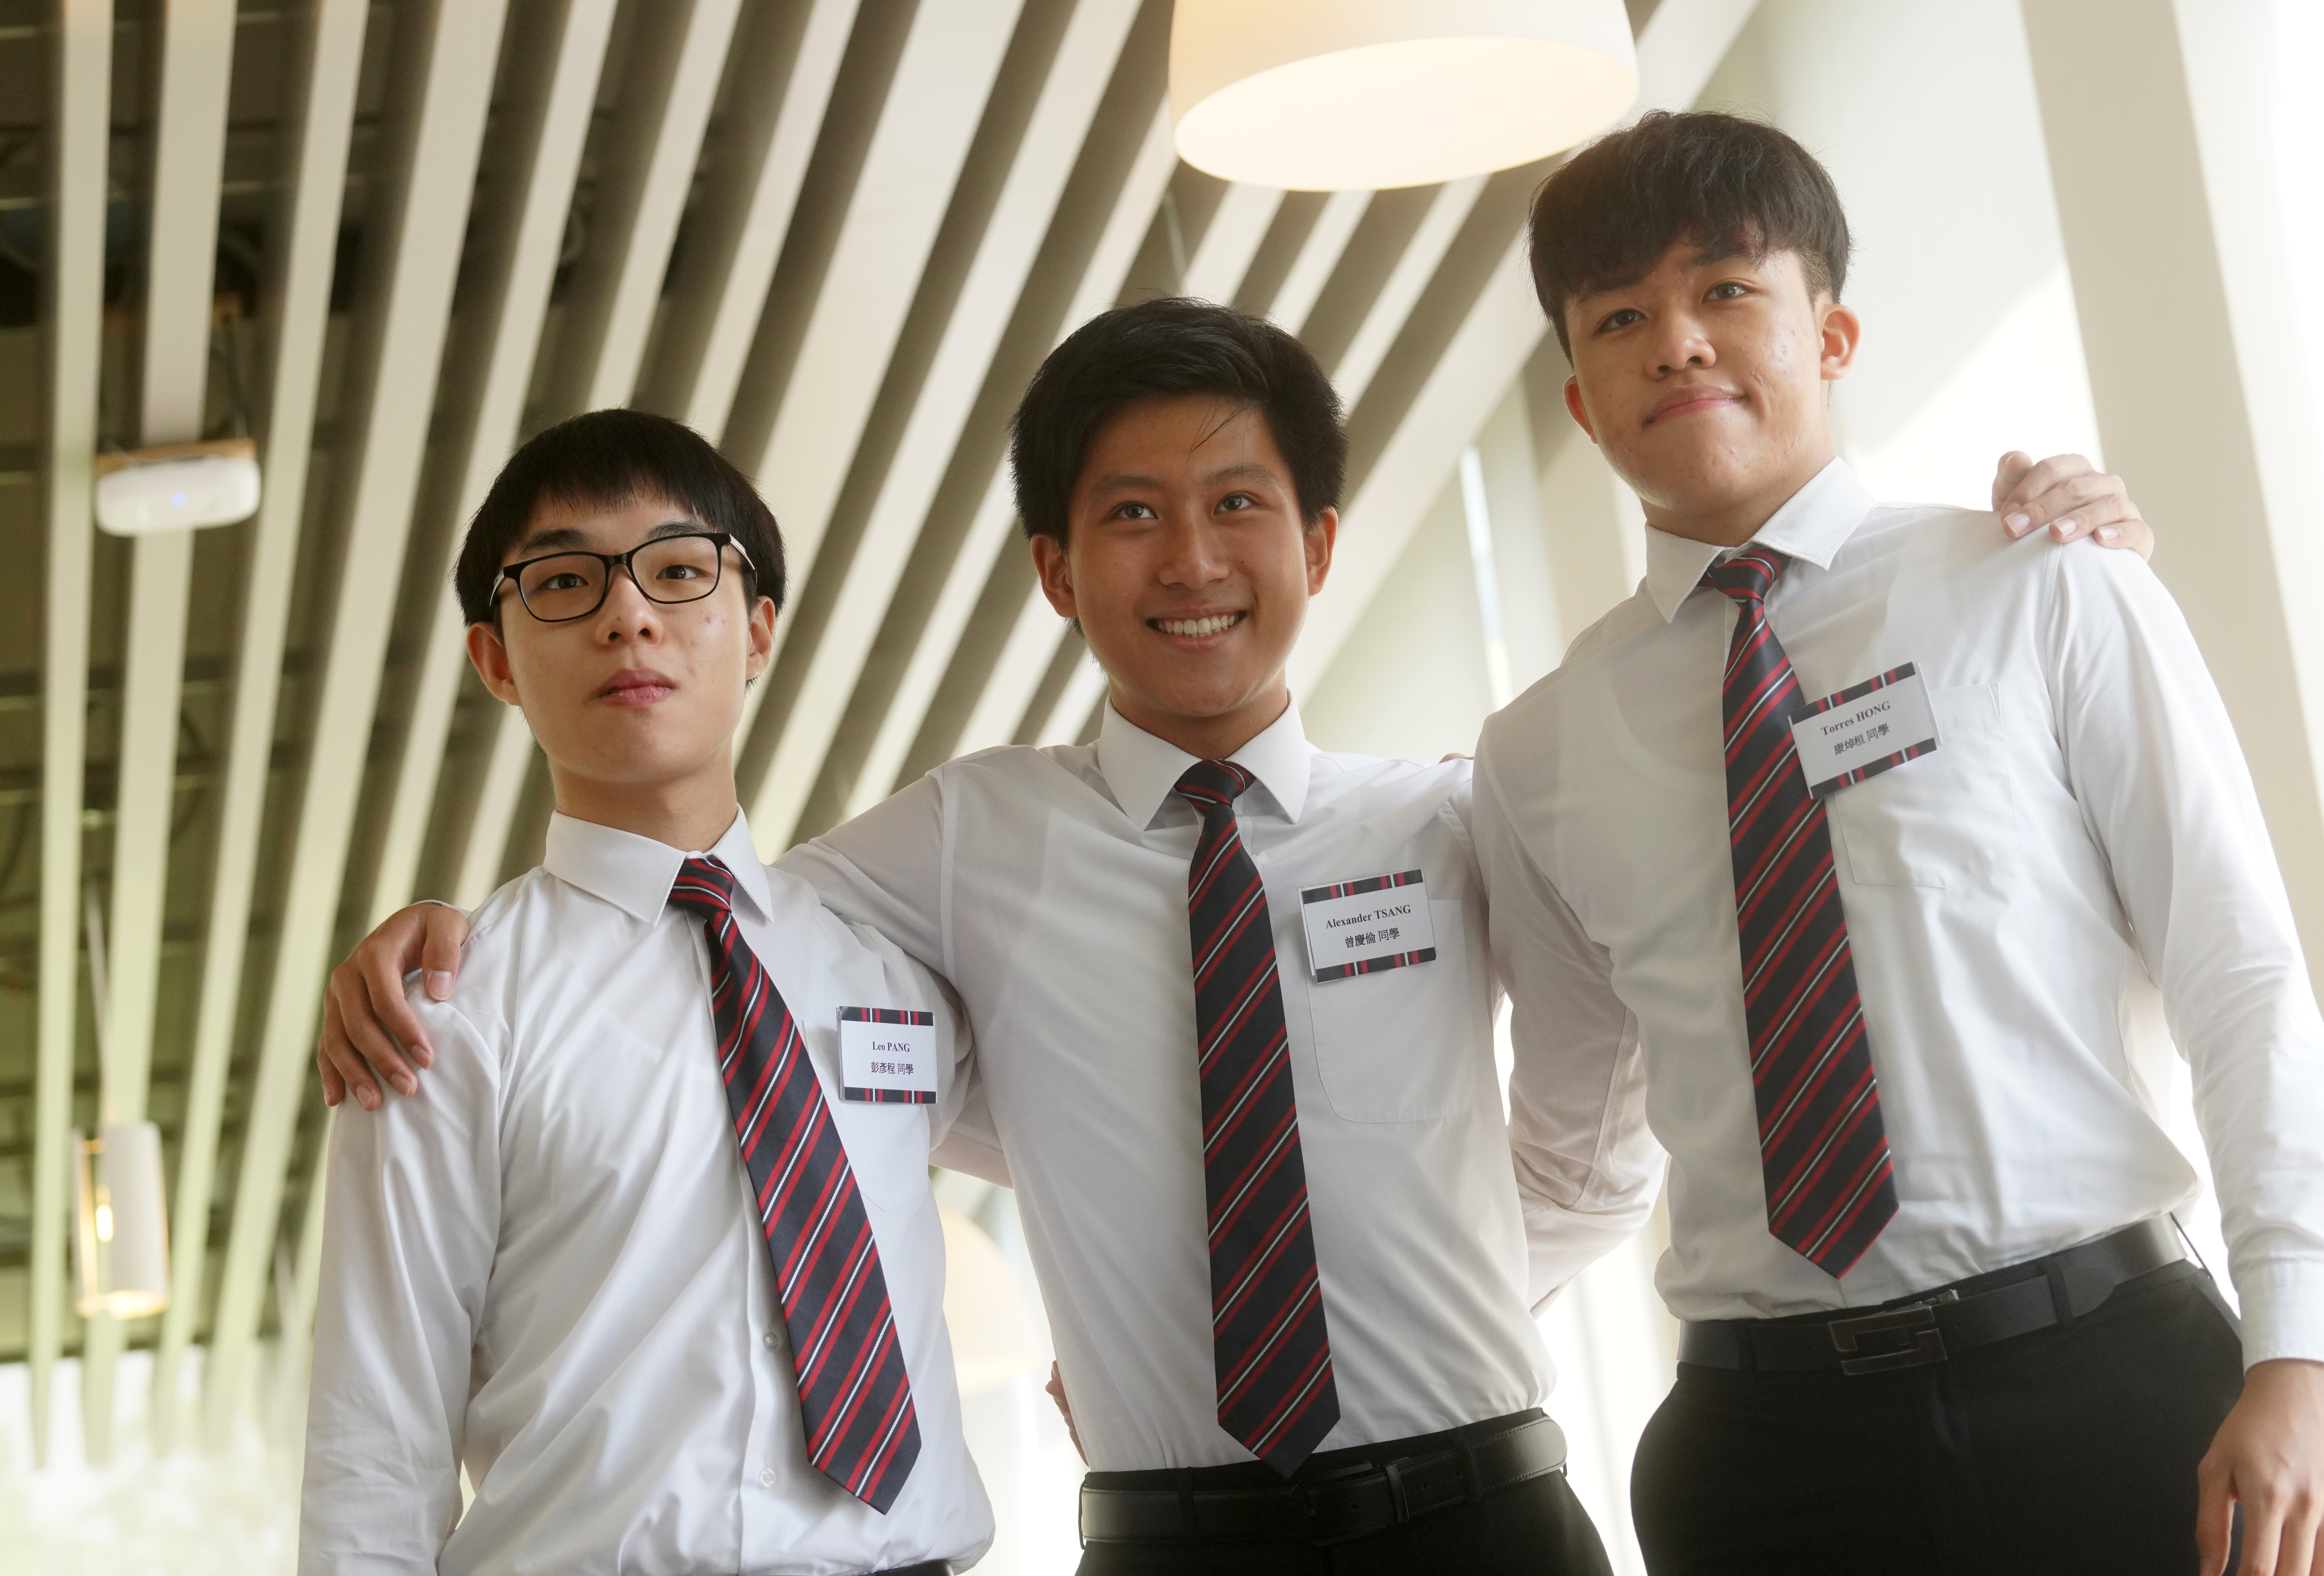 Leo Pang Yin-ching, Alexander Tsang Hing-lun and Torres Hong Cheuk-wun of Diocesan Boys’ School all achieved the maximum score of 45 points on the IB exam. Photo: SCMP /  Winson Wong